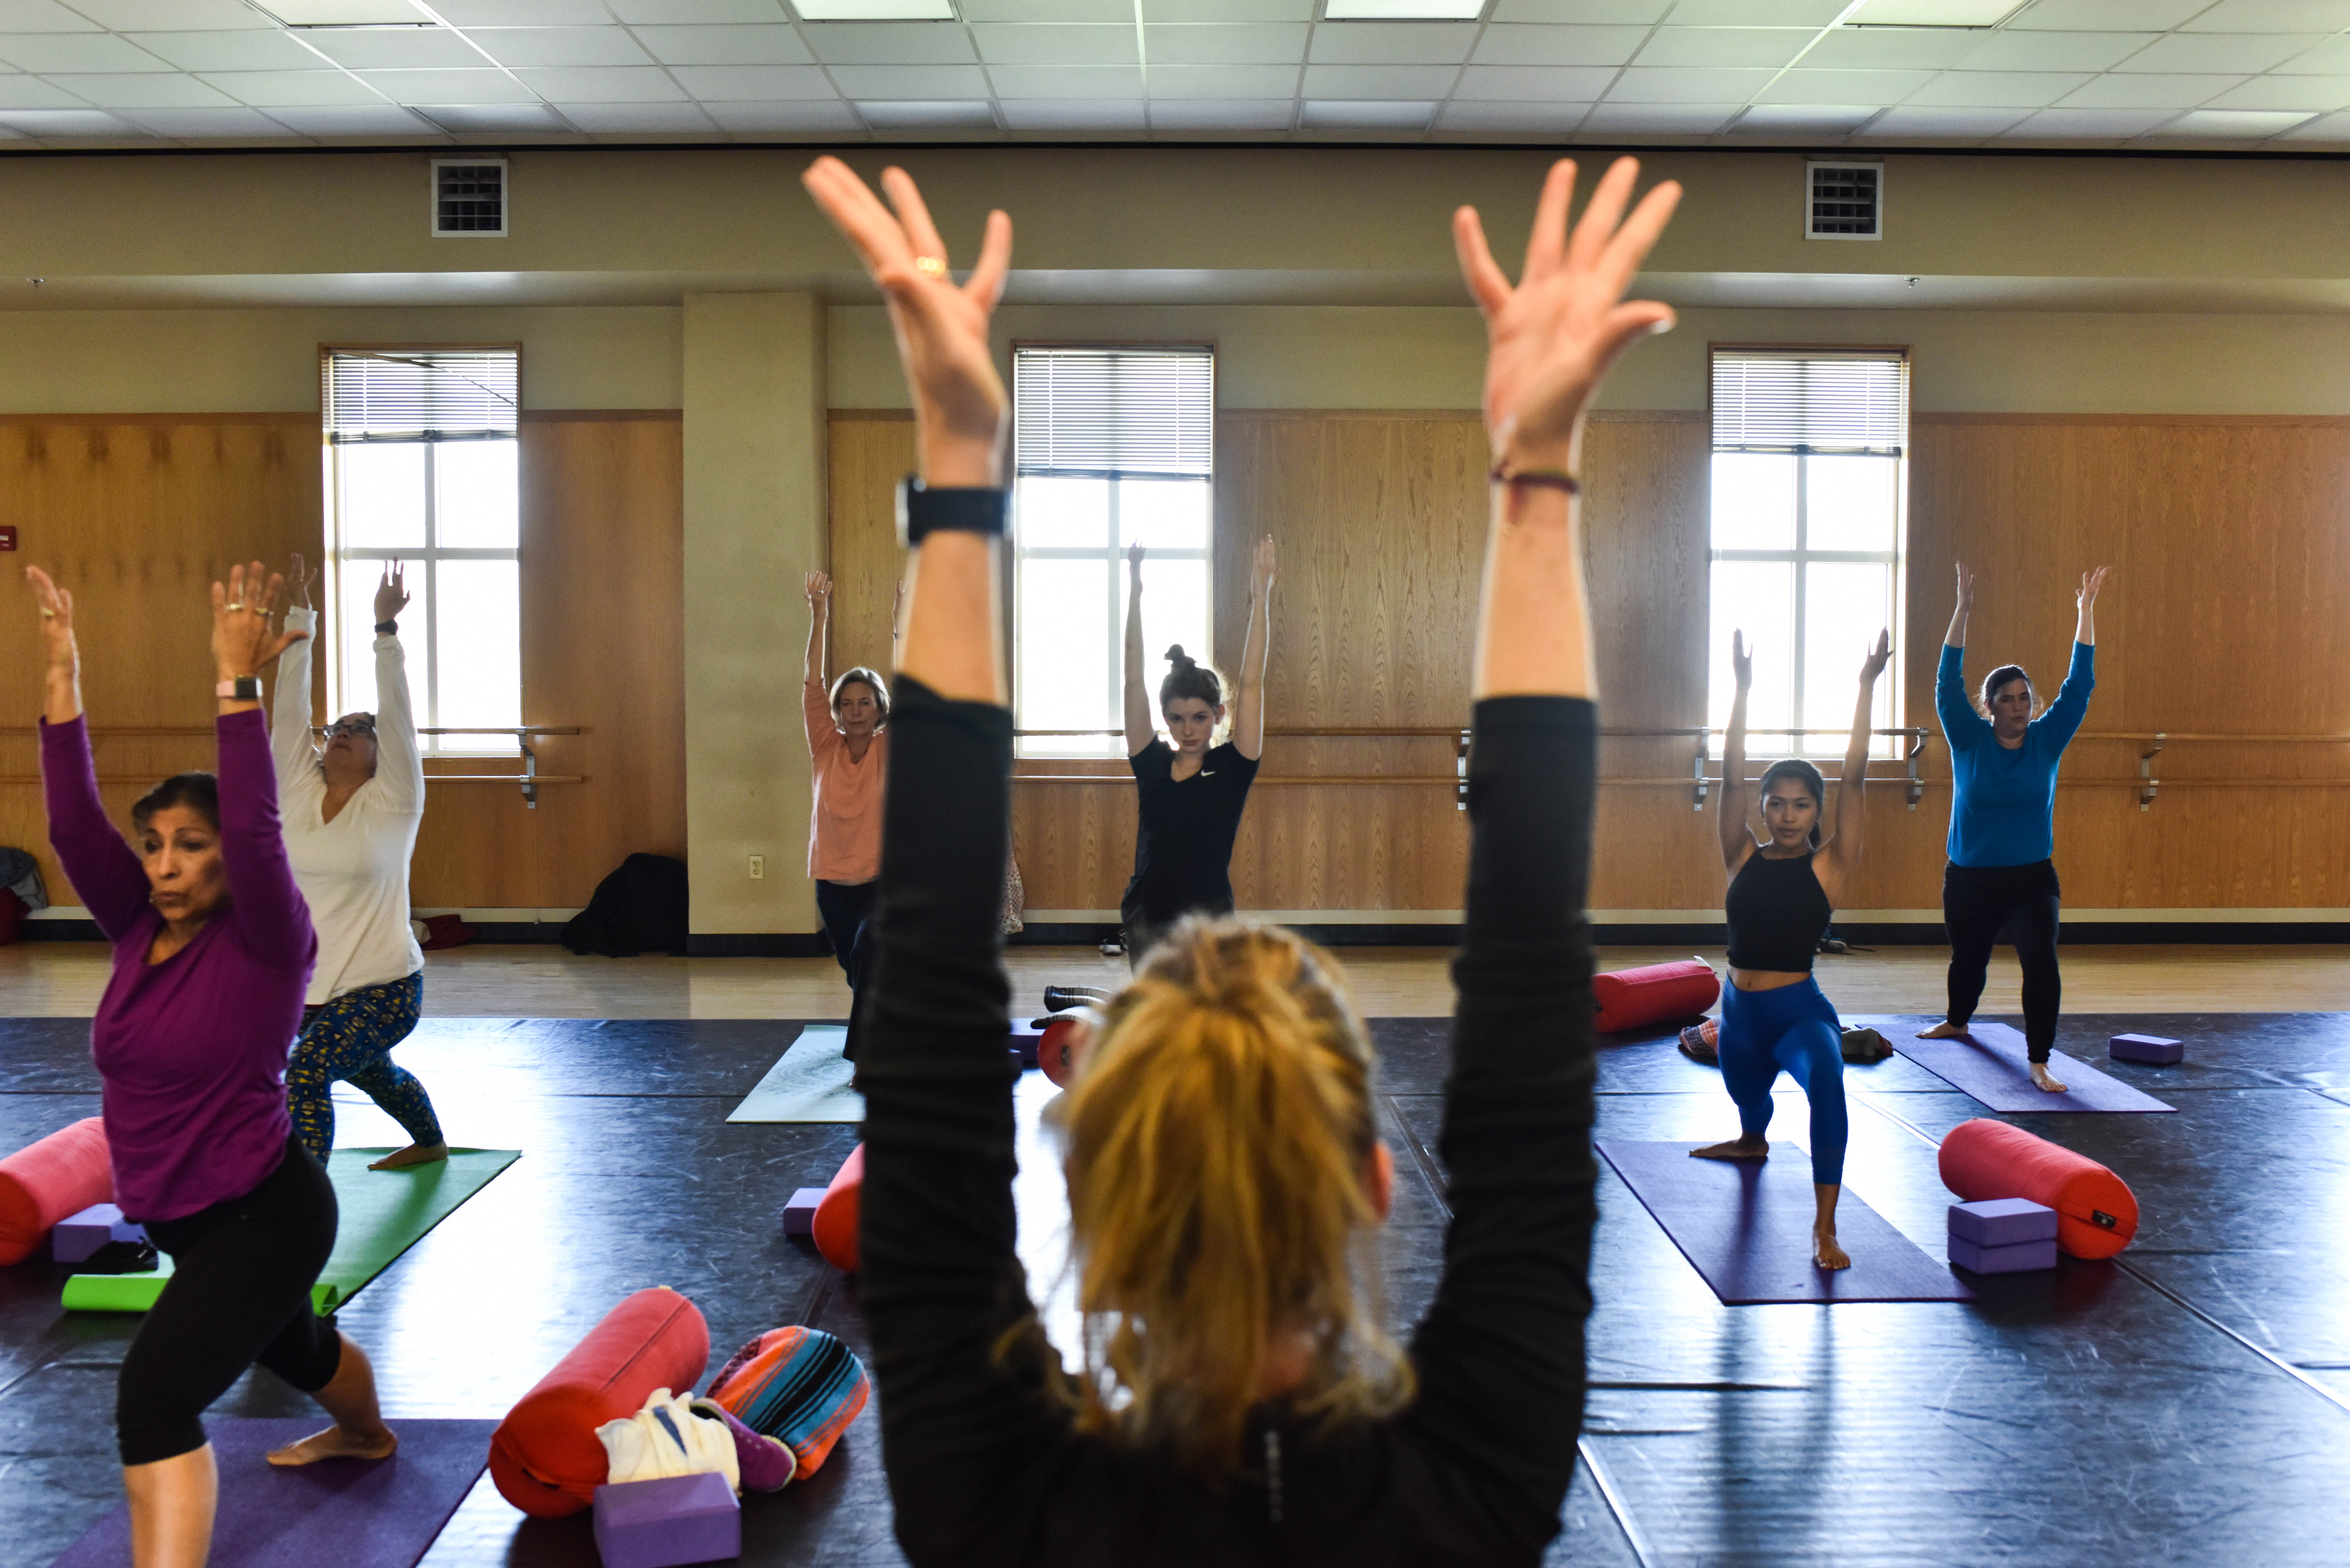 Yoga gives students, faculty chance to unwind